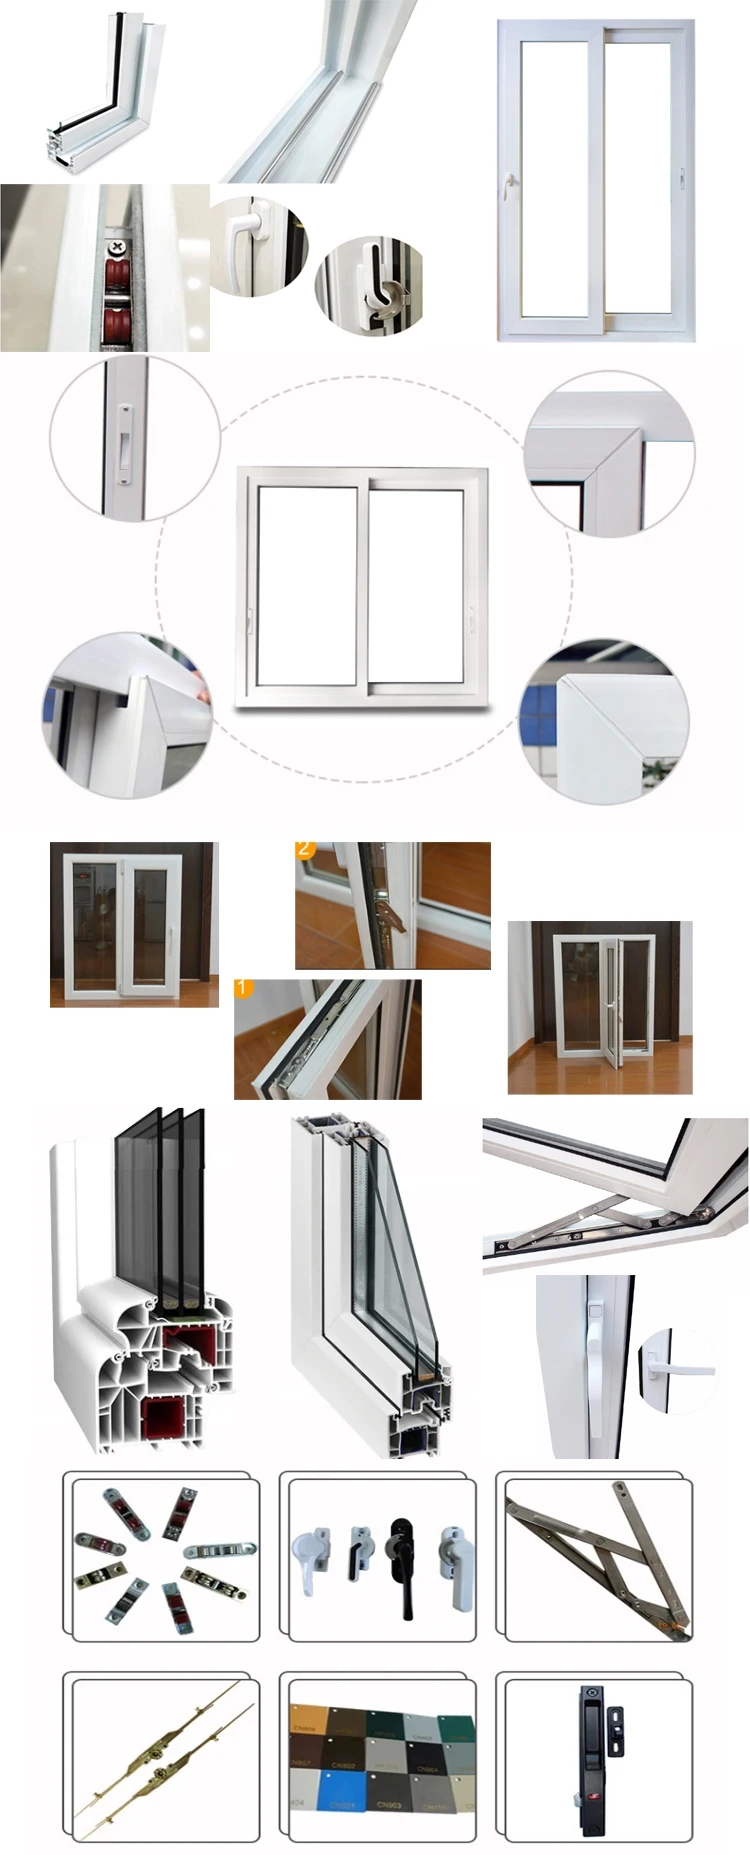 Welcome to inquiry price cheap plastic slide door house windows and doors upvc open style patio for sale At Wholesale